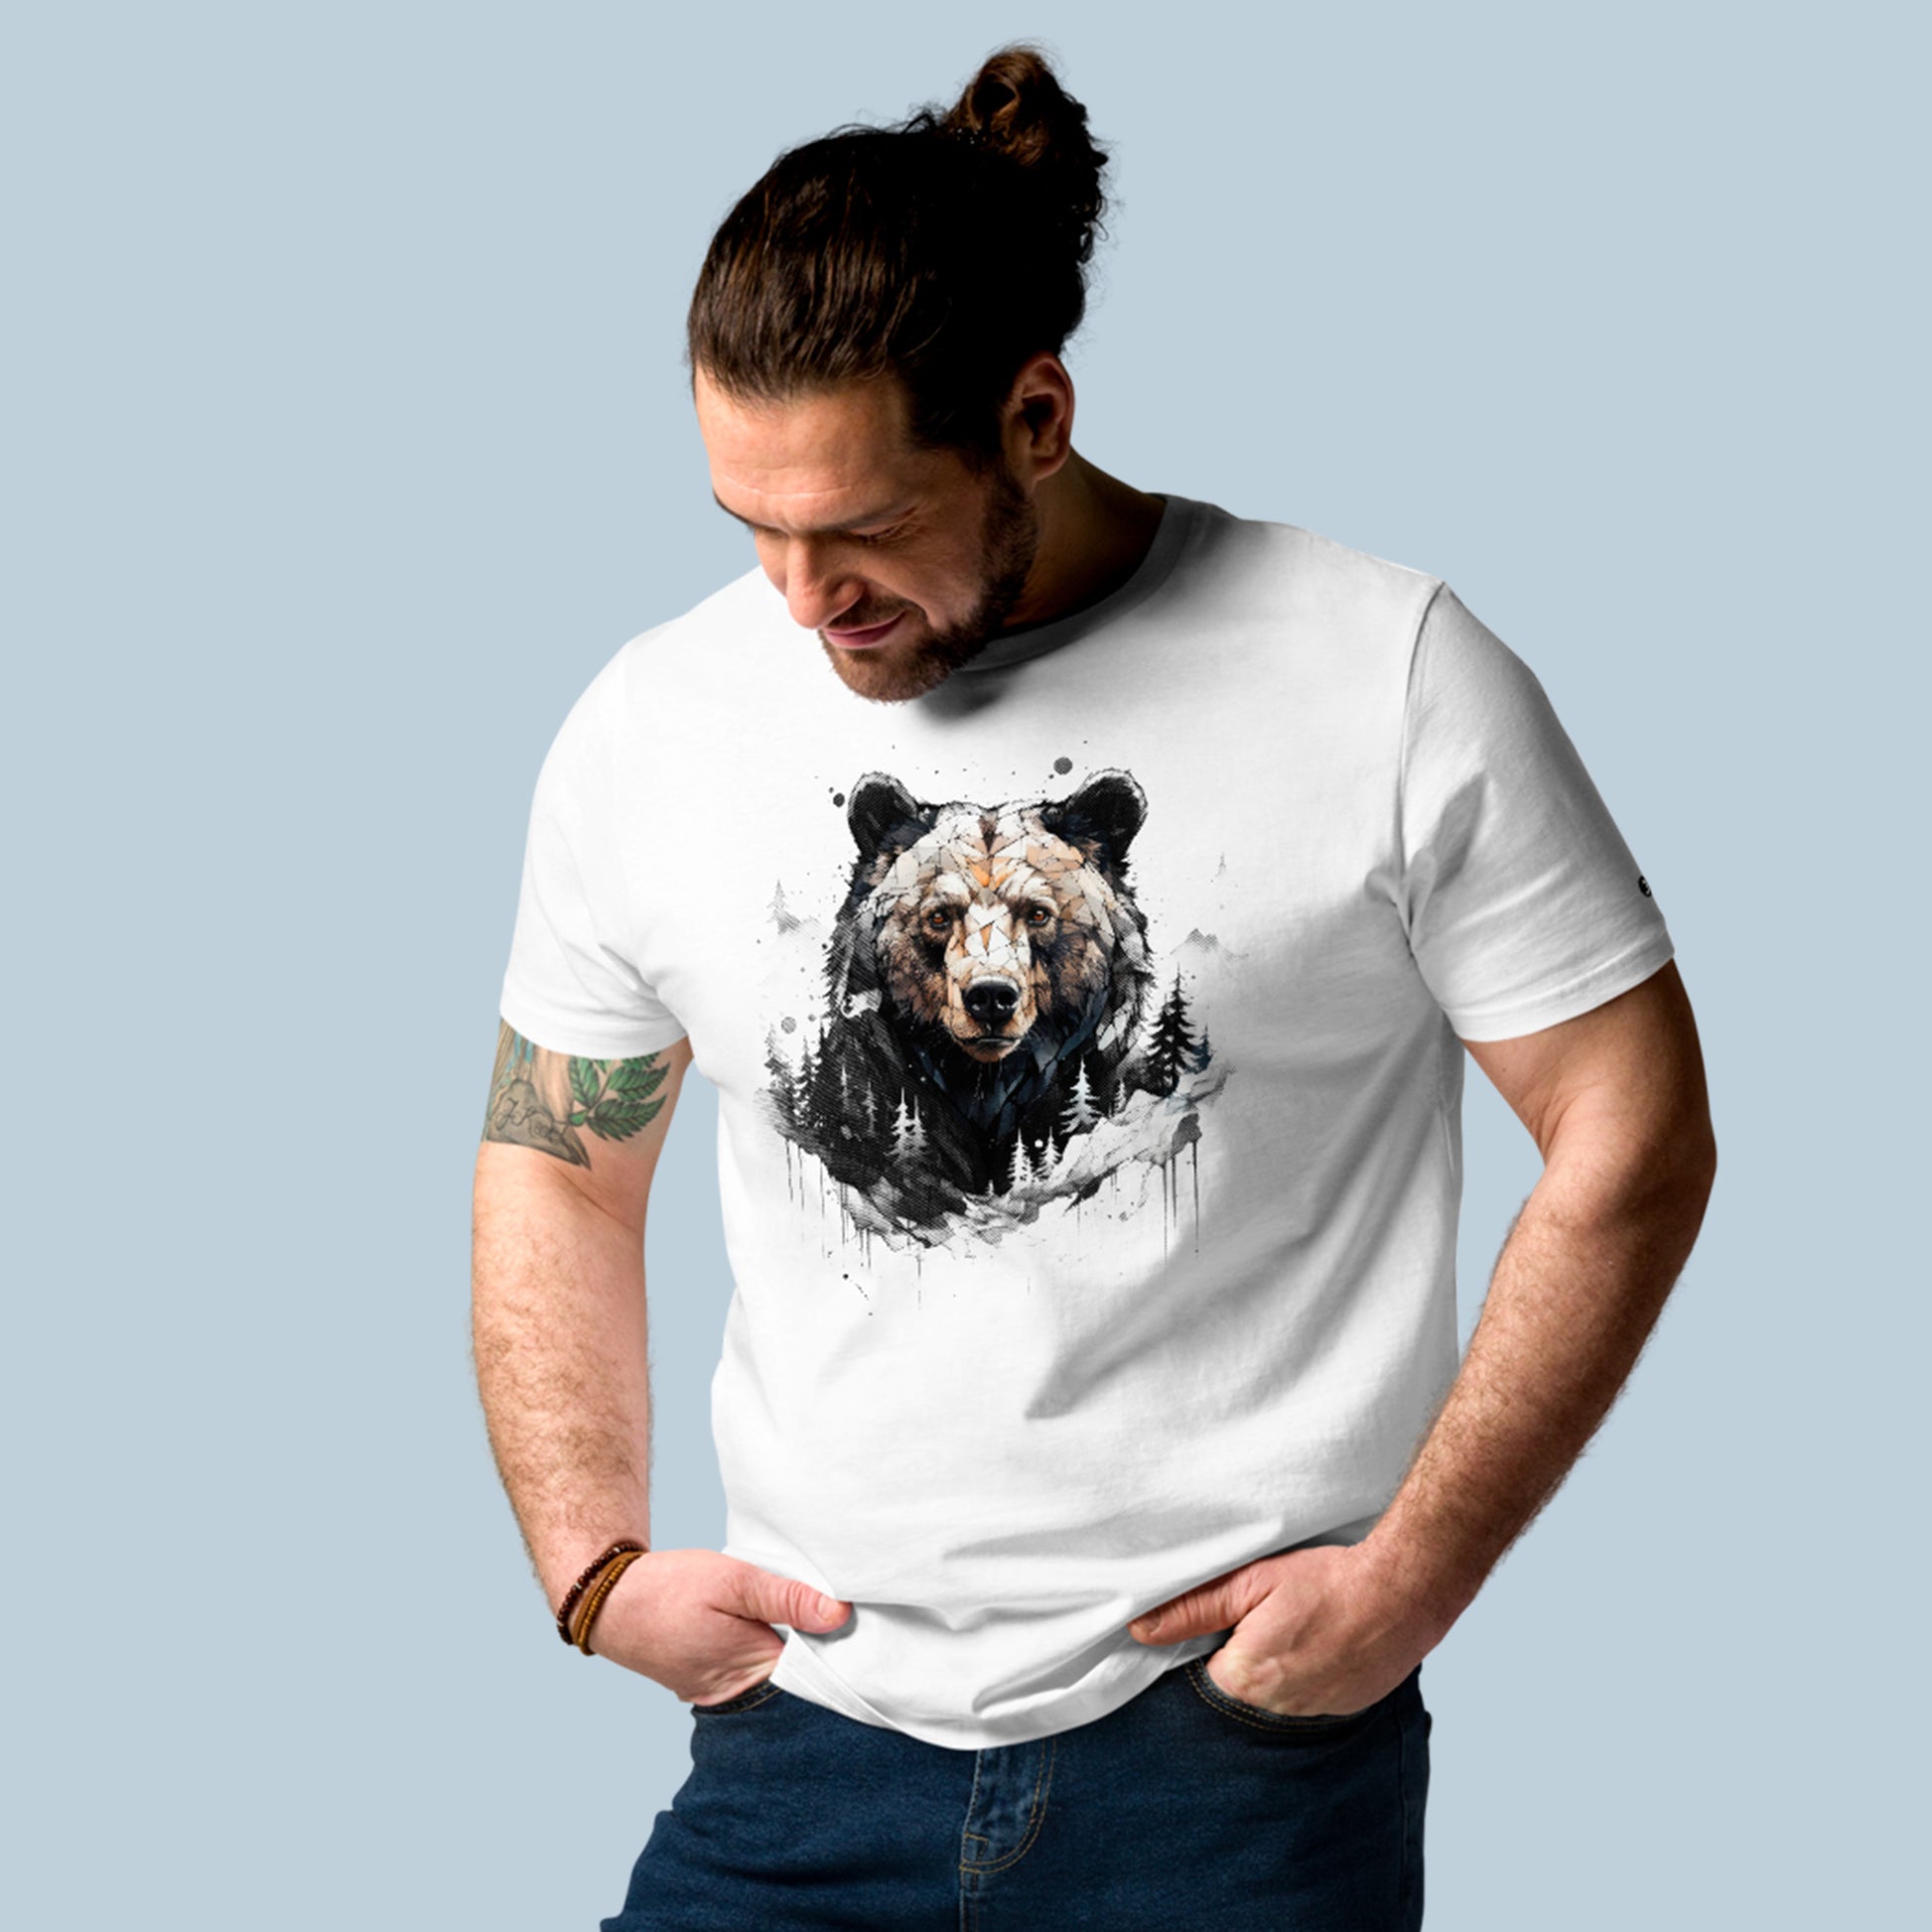 Guardian Of The Forest Unisex organic cotton t-shirt- worn by male model